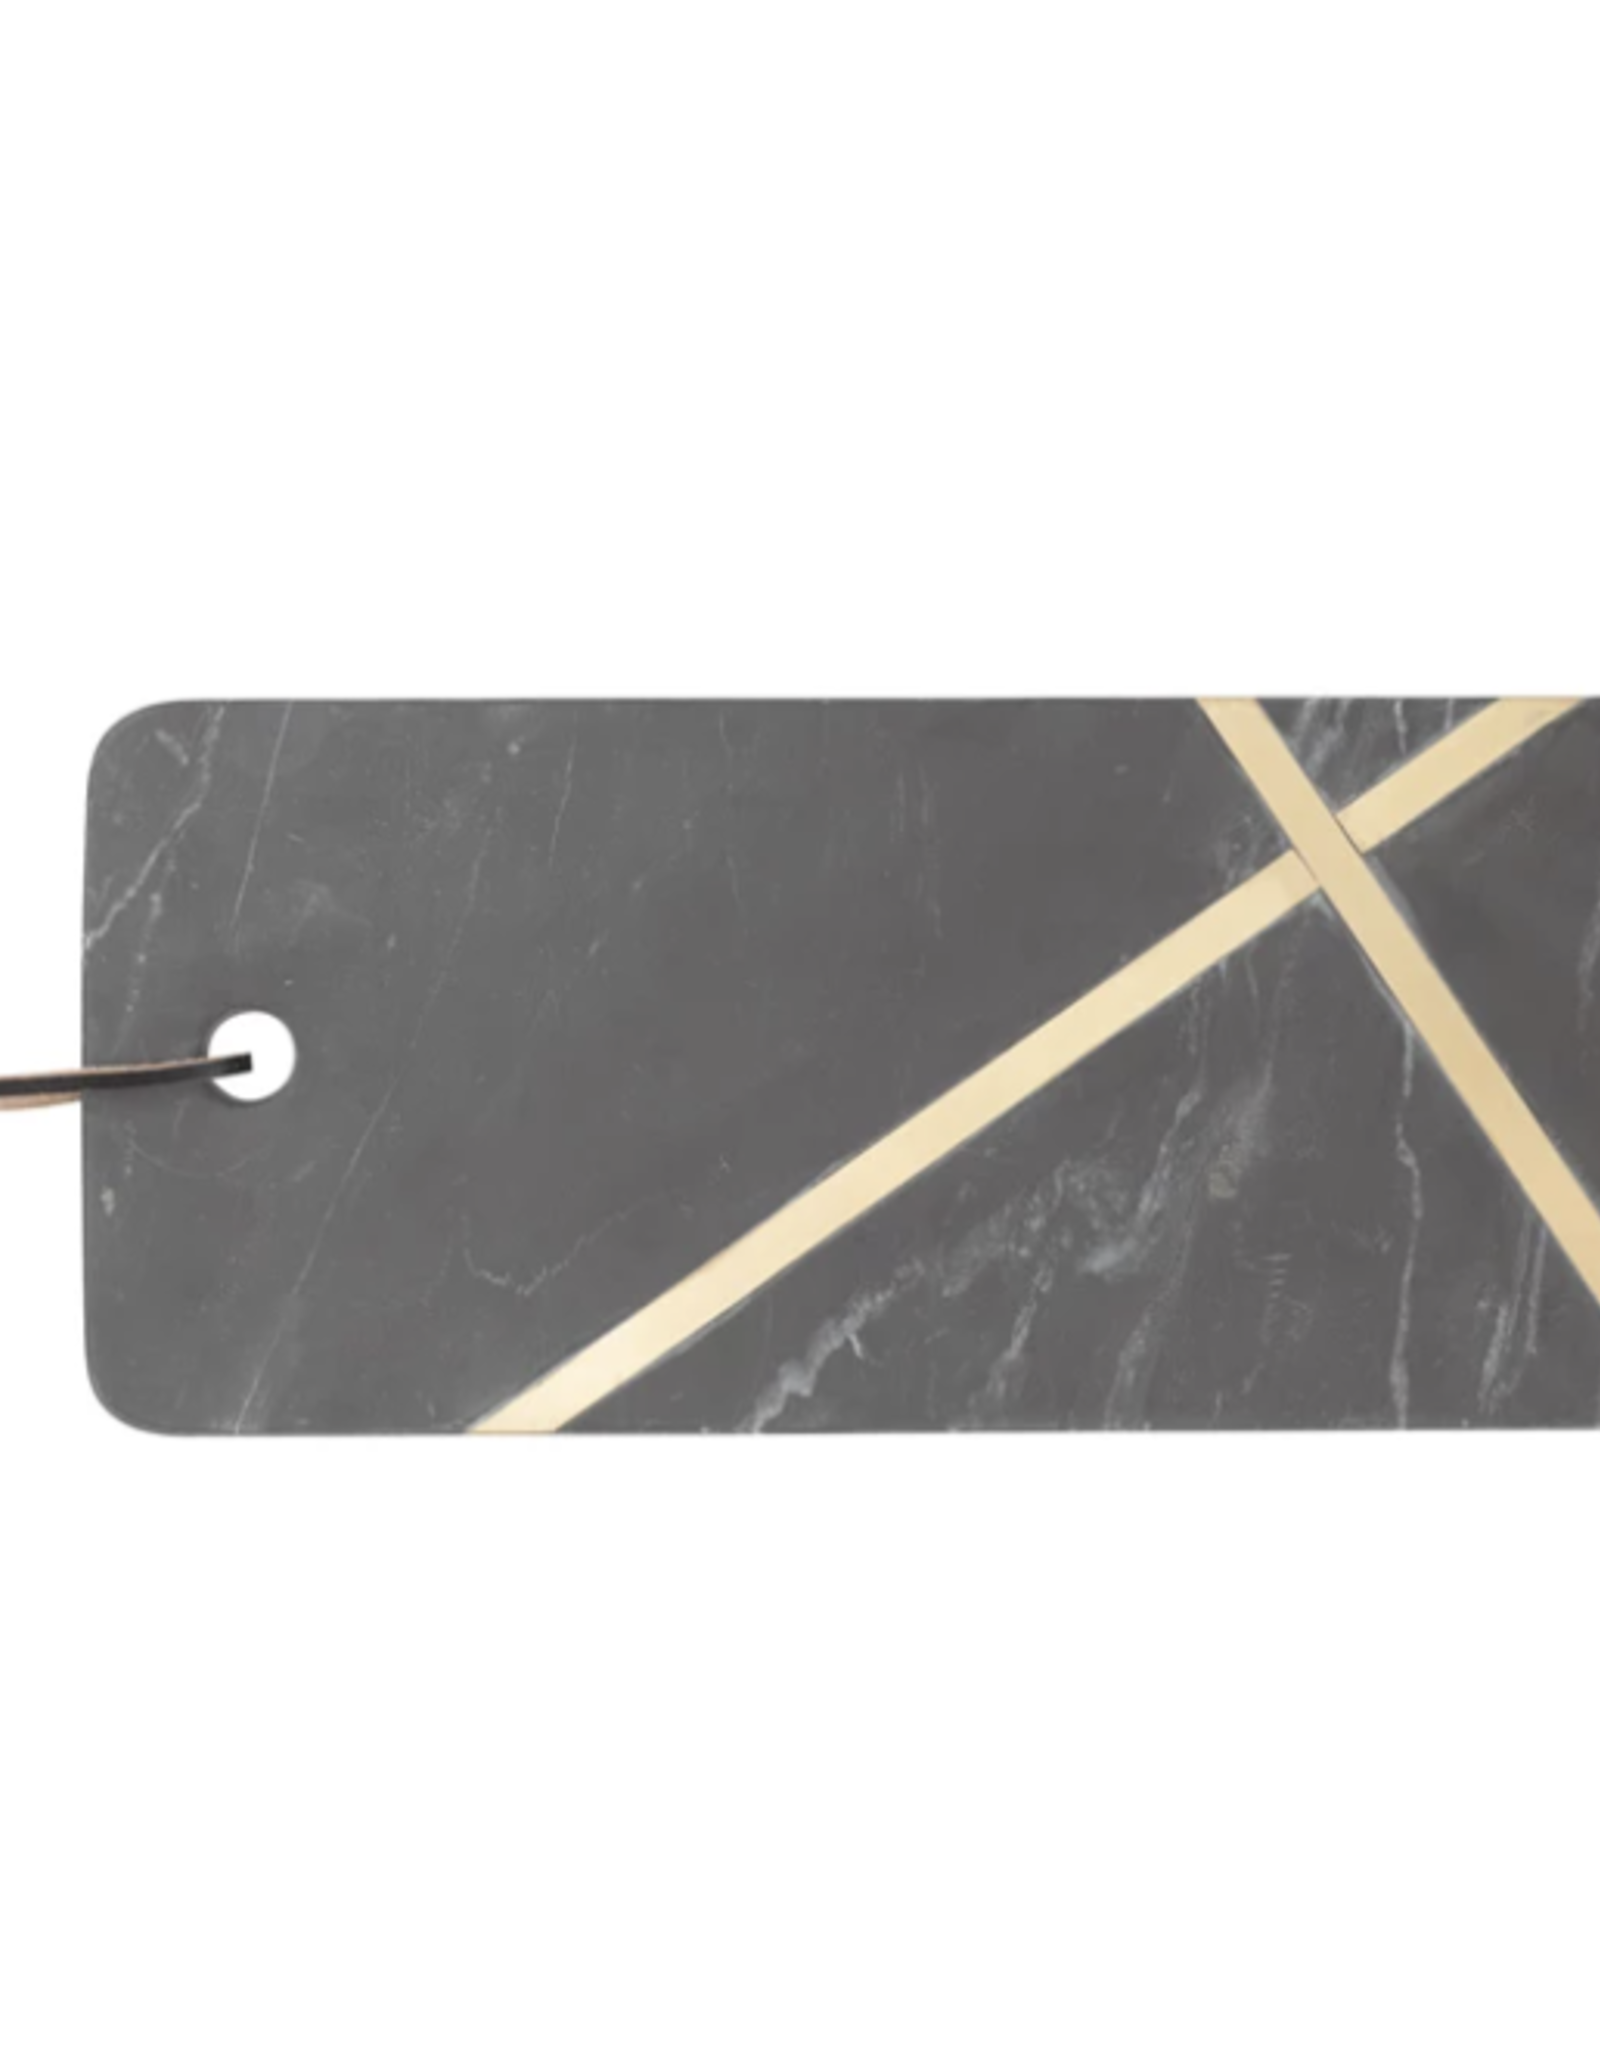 Marble Cutting Board with Brass Inlay, Leather Tie